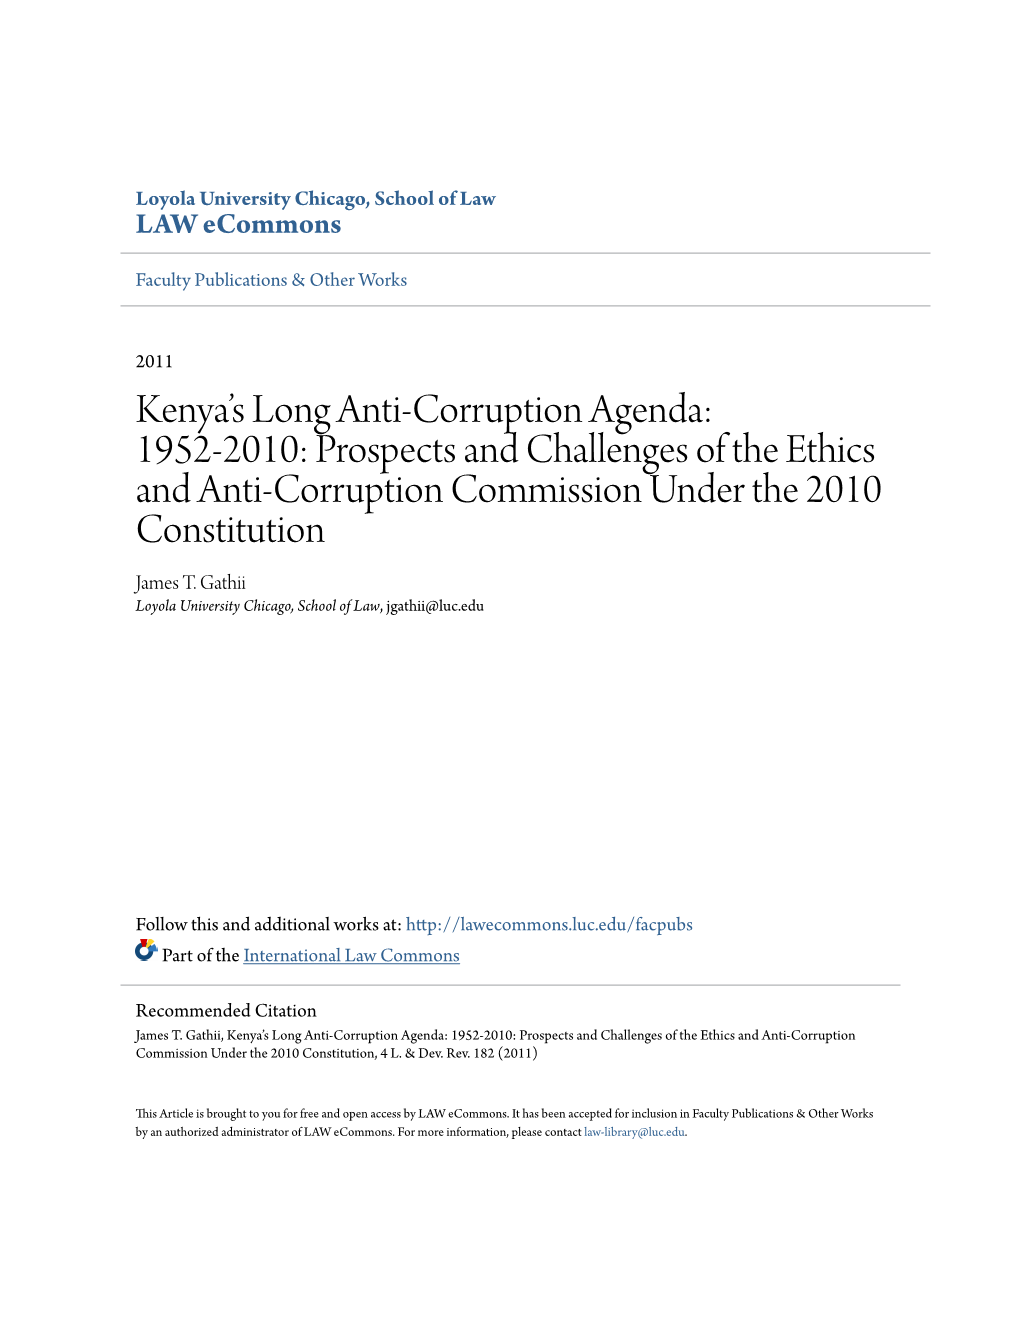 1952-2010: Prospects and Challenges of the Ethics and Anti-Corruption Commission Under the 2010 Constitution James T